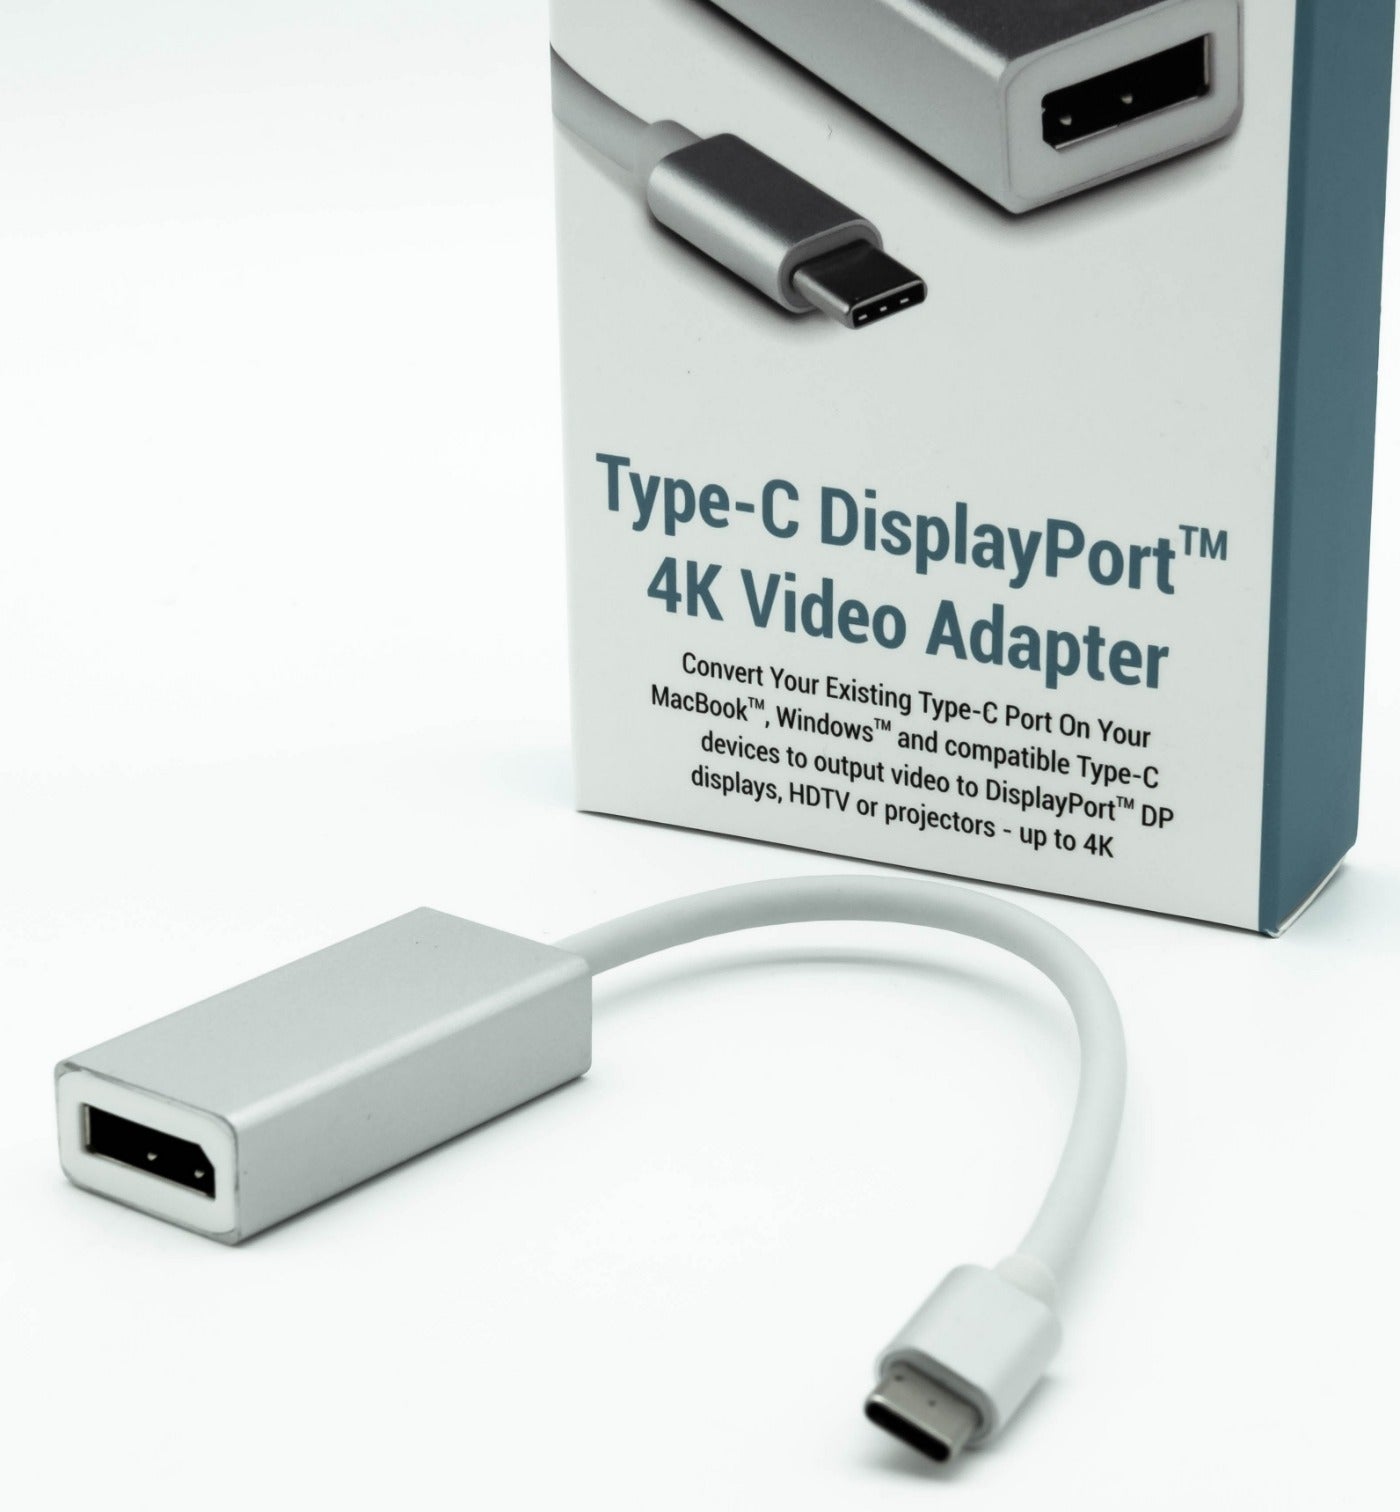 Display adapter for Type-C devices